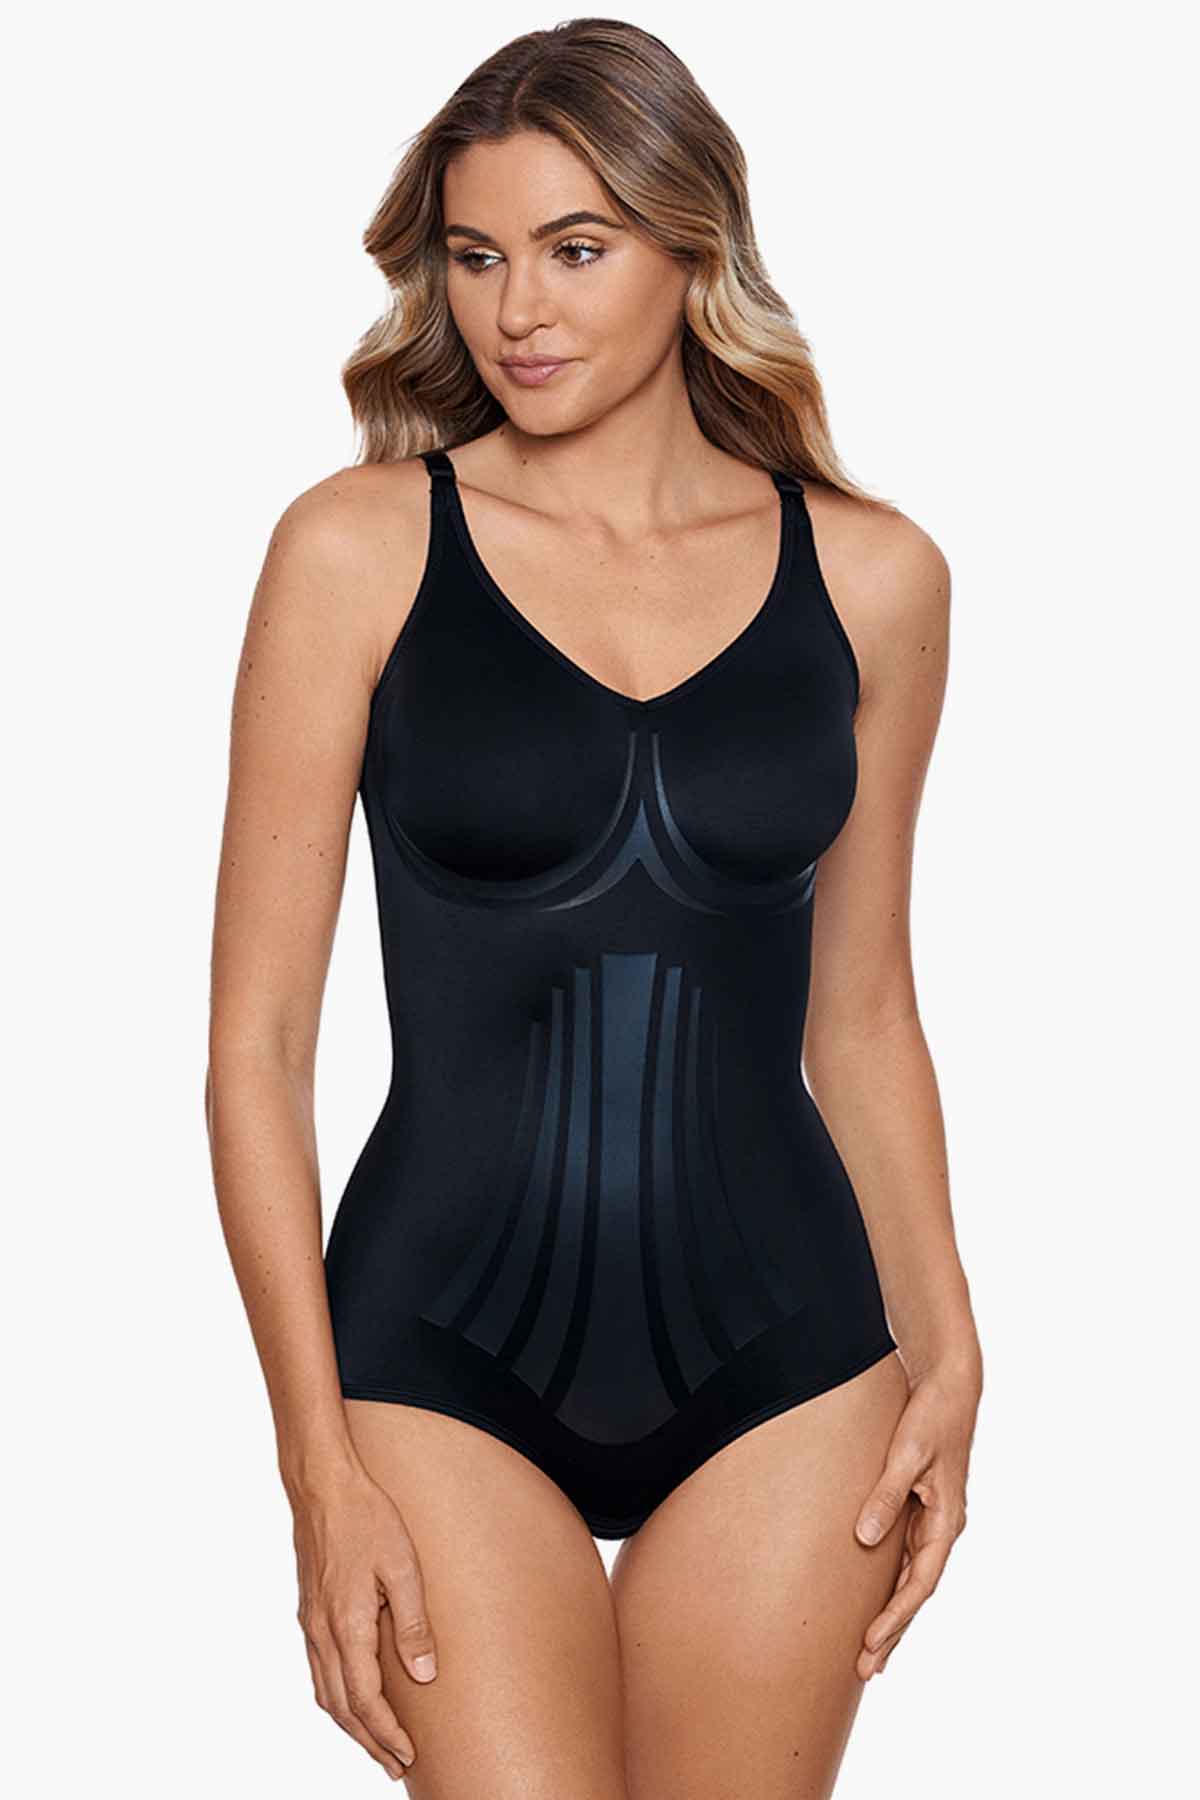 Miraclesuit Lycra Fit Sense Bodybriefer